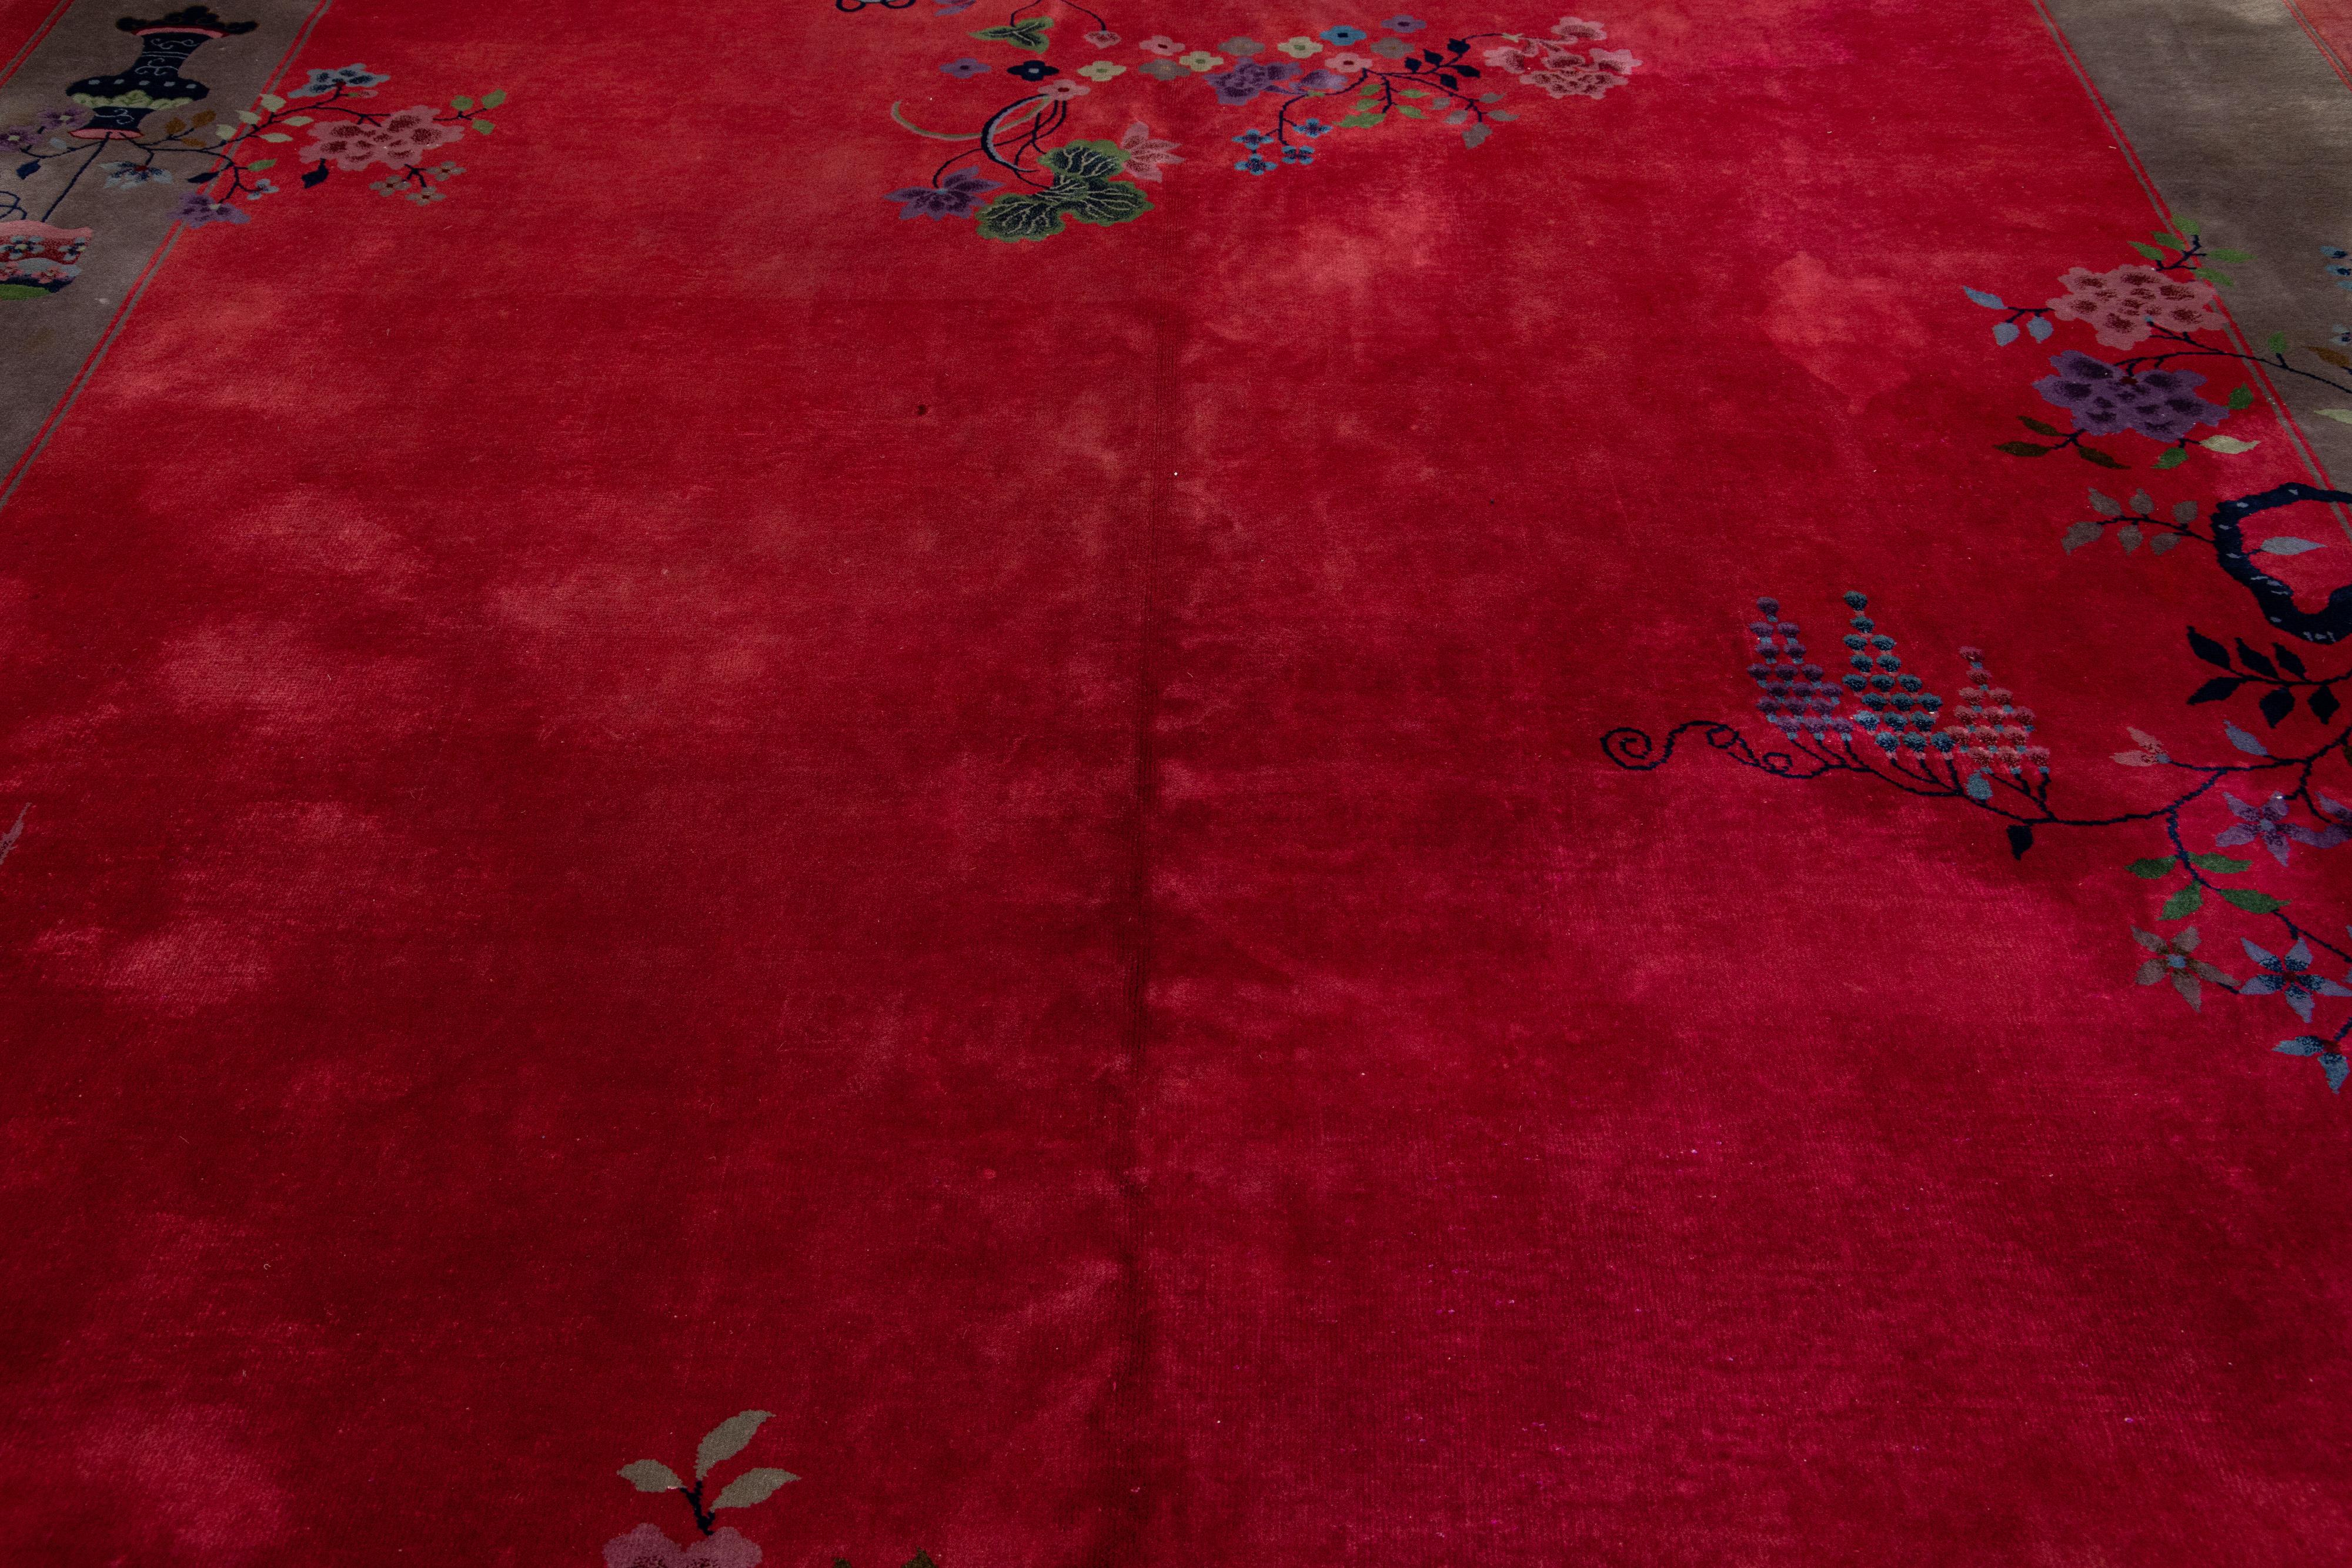 Red Art Deco Chinese Wool Rug with Floral Motif From the 1920s For Sale 4